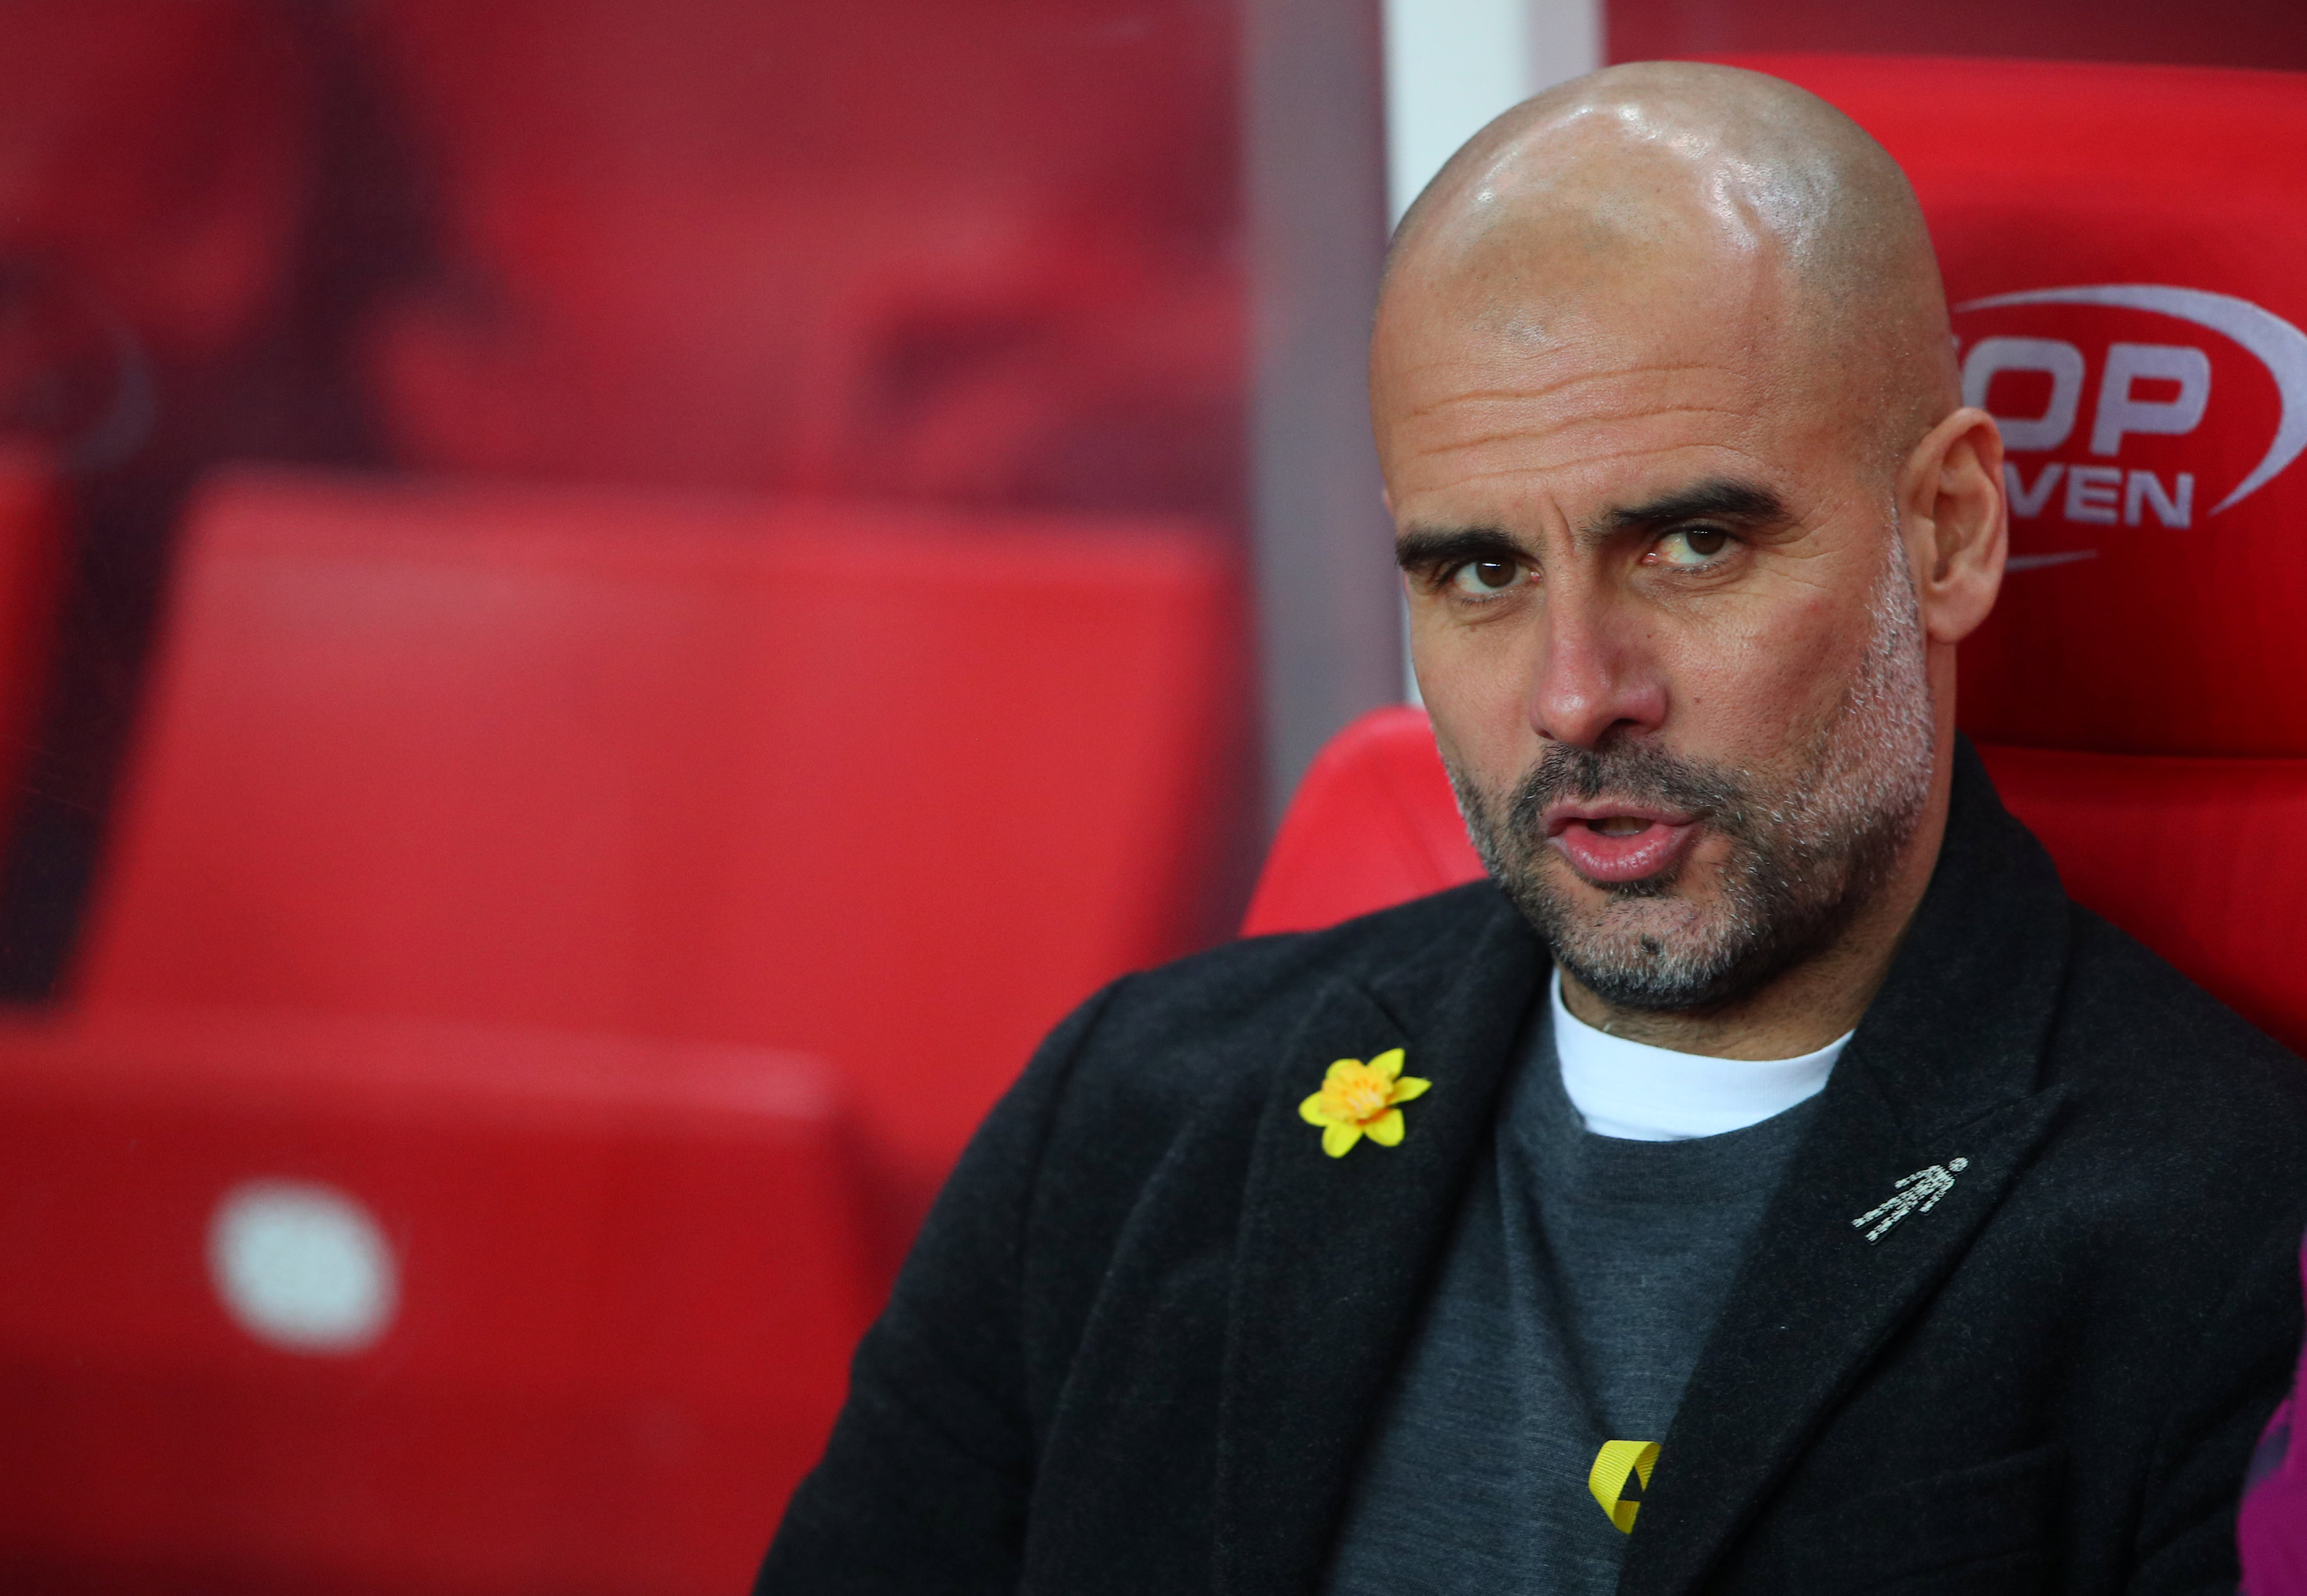 Pep Guardiola, during his match against Stoke City on March 12, 2018 (by Hannah McKay/Reuters)